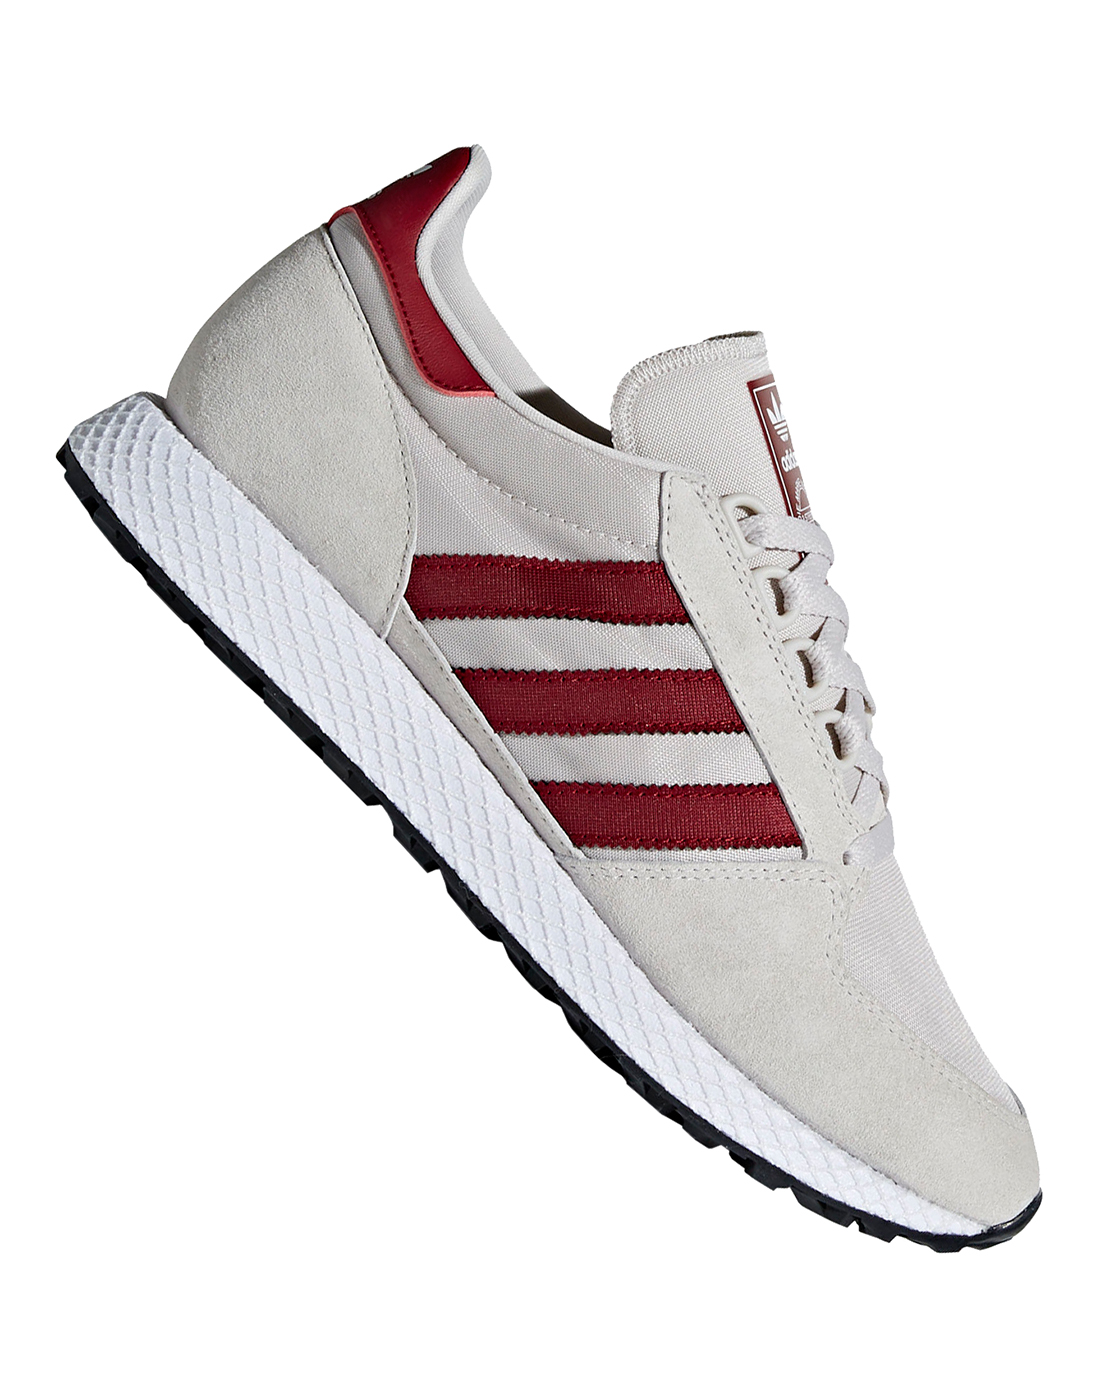 adidas men's forest grove